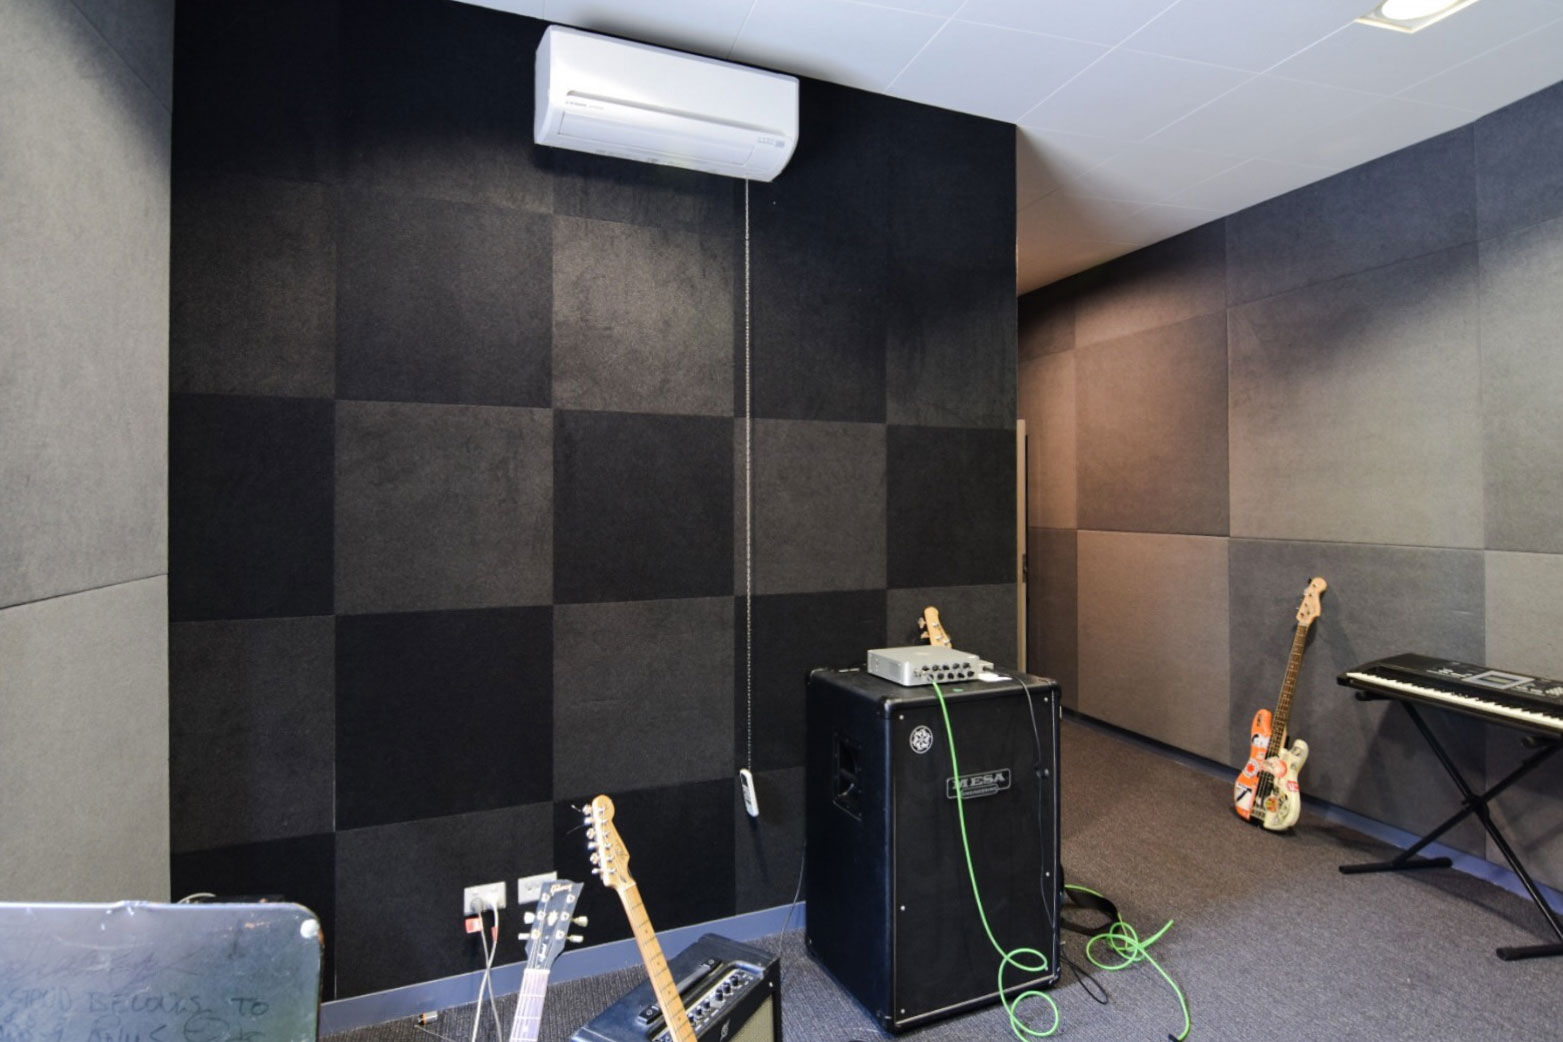 Music room with instruments and acoustic panels